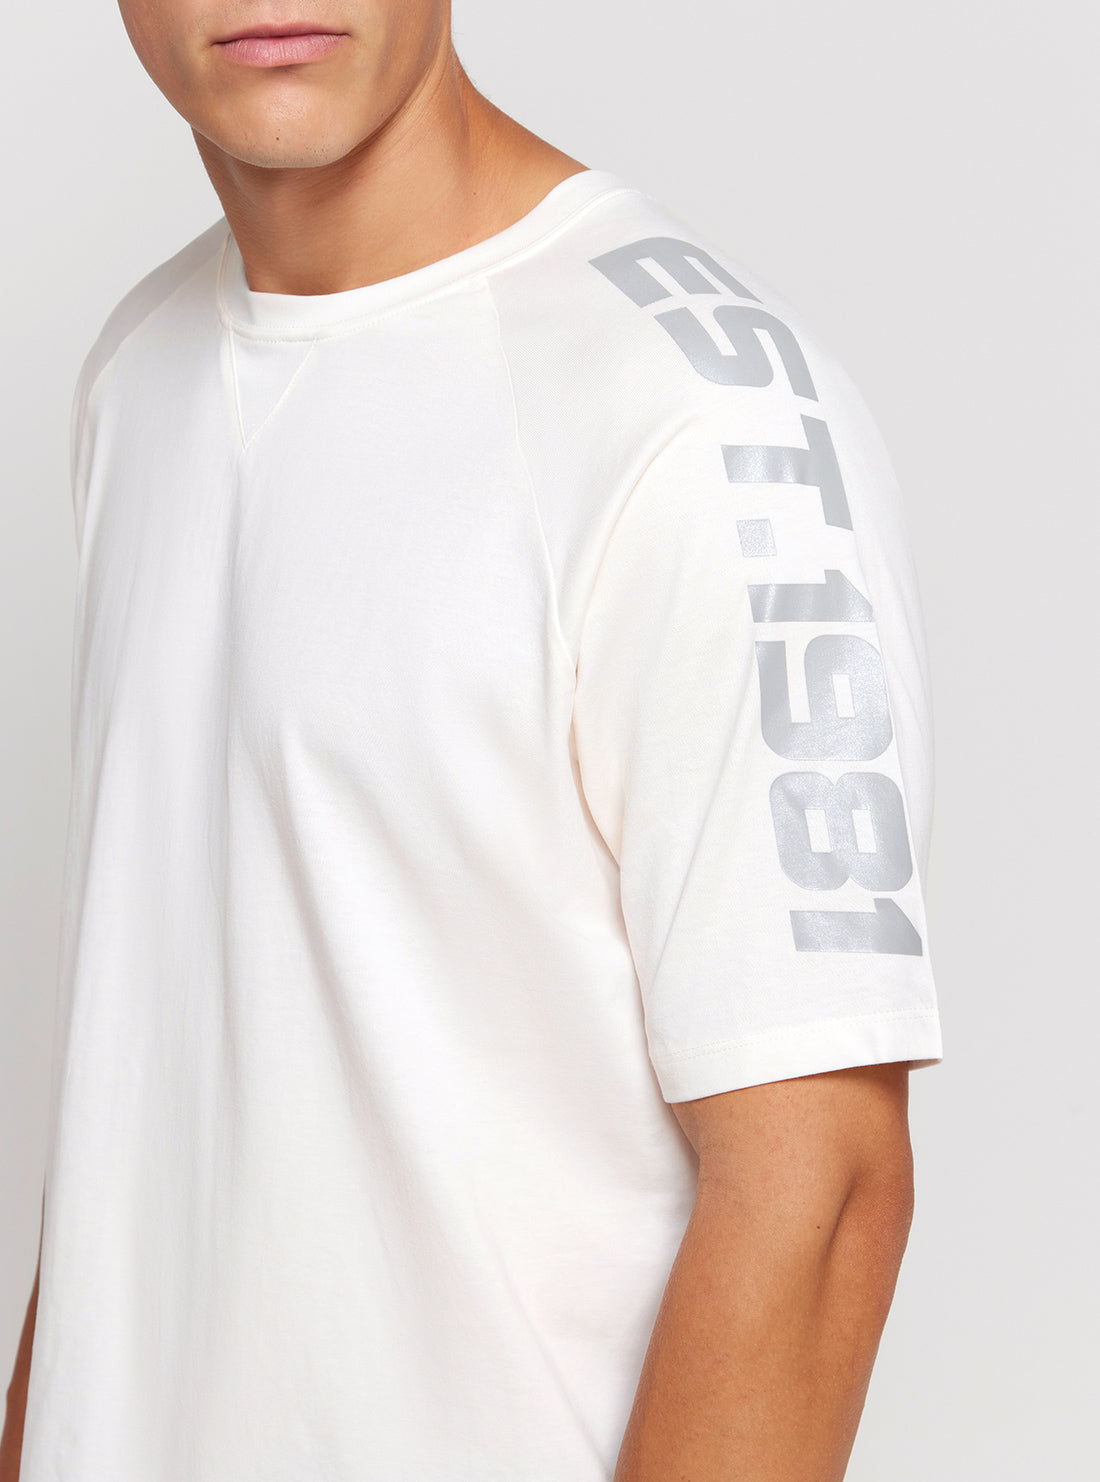 GUESS White Baloo Short Sleeves T-Shirt side view